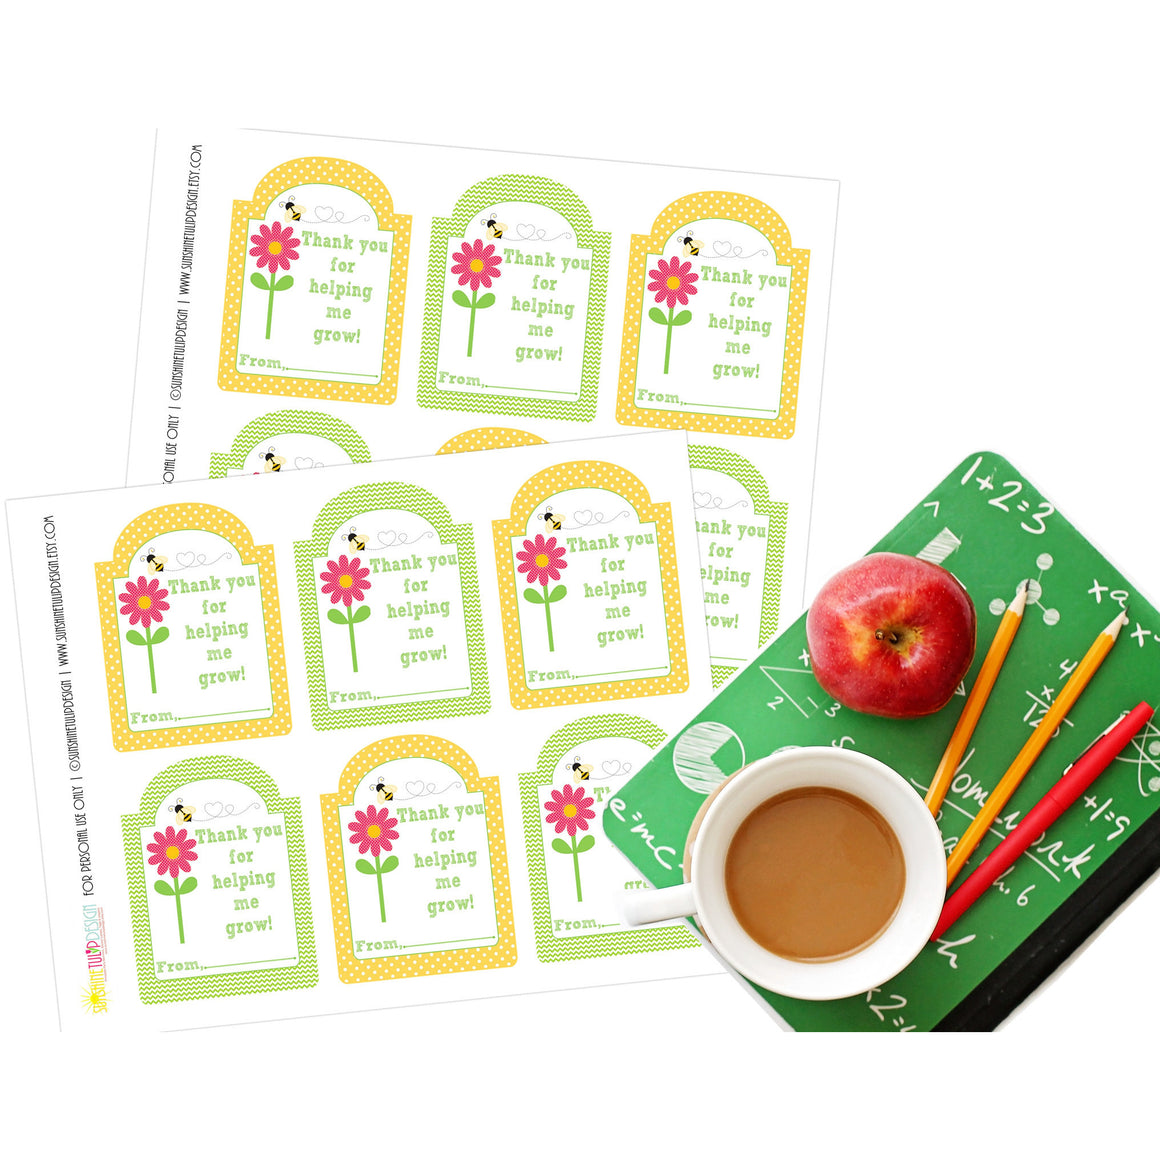 Printable Teacher Appreciation Gift Tags, Thank You for Helping Me Grow Tags by Sunshinetulipdesign - Sunshinetulipdesign - 1